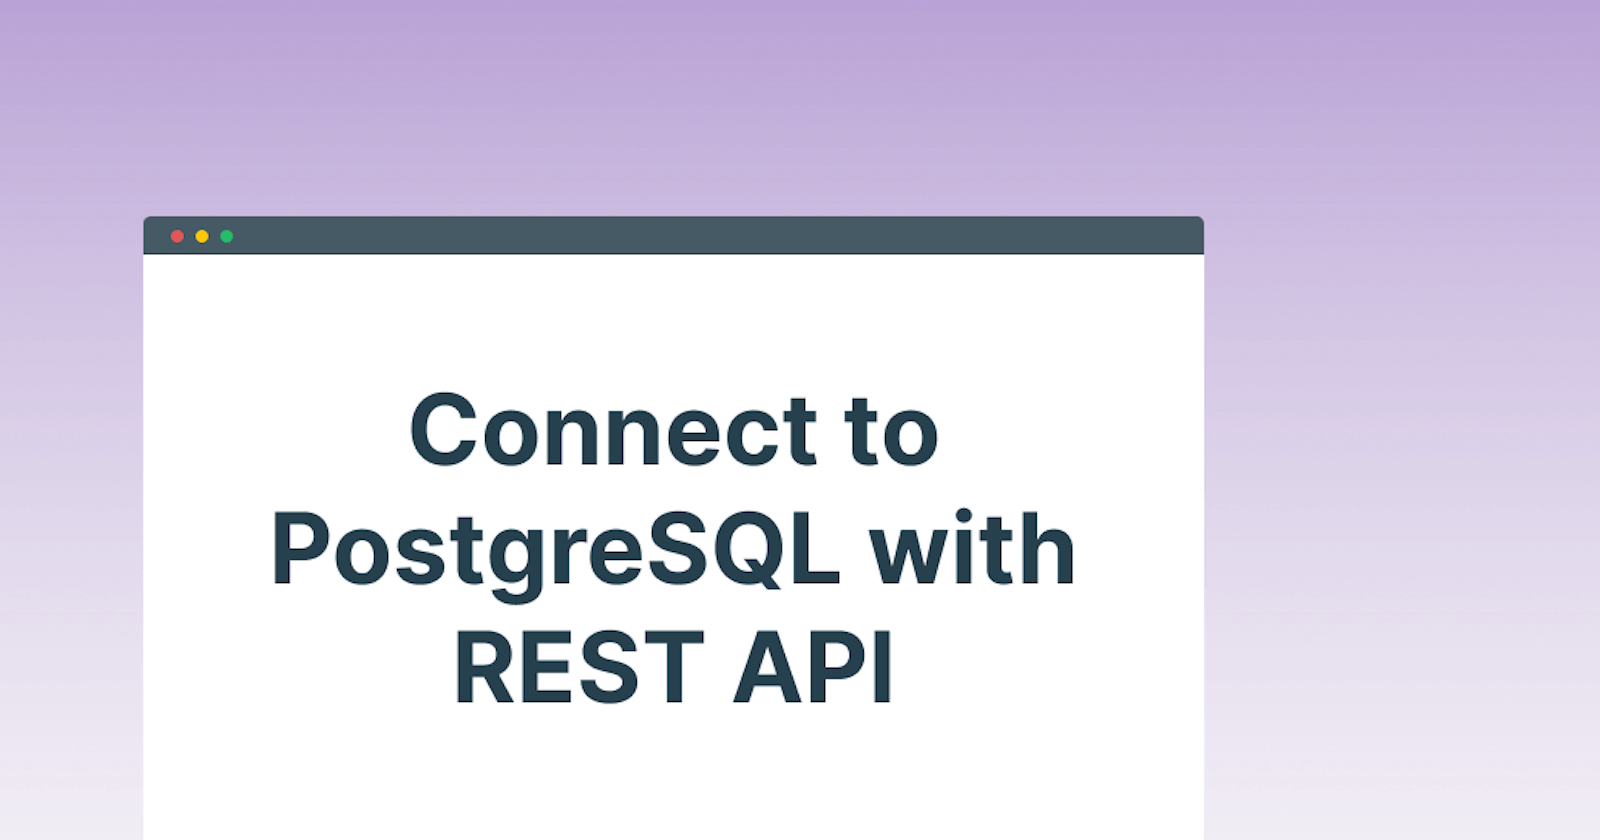 The easiest way to connect to the PostgreSQL database with a REST API